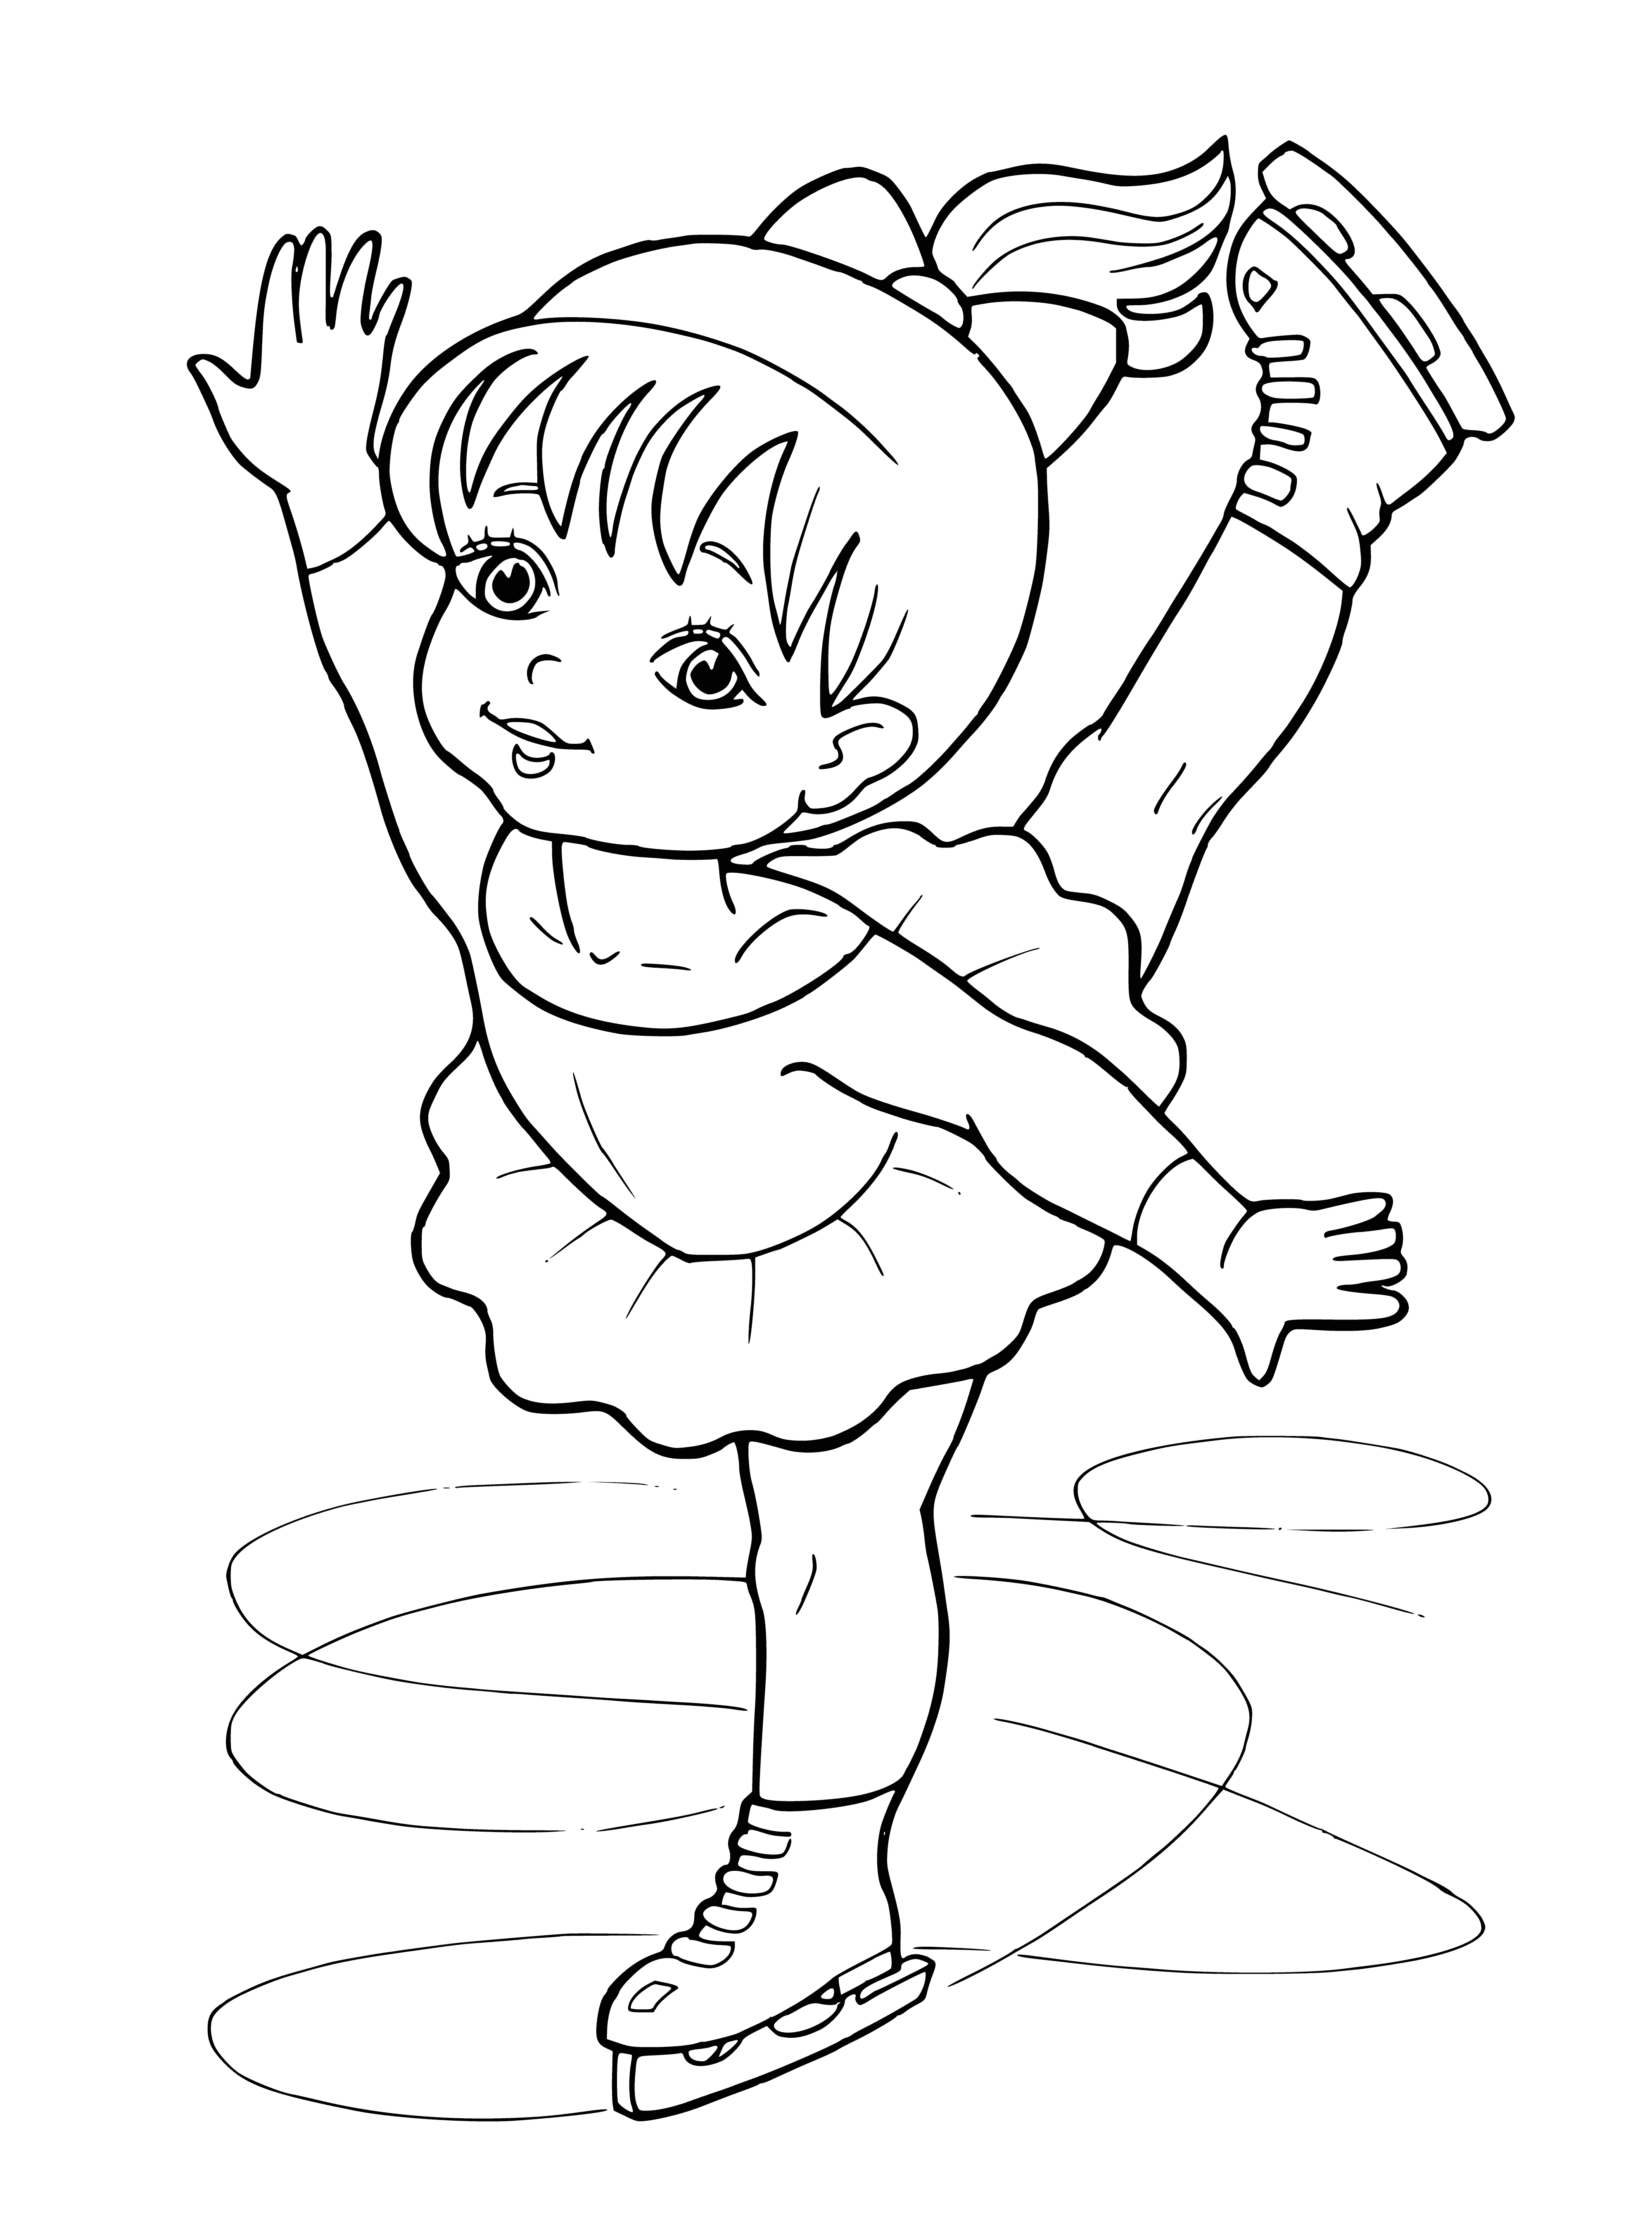 coloring page: Figure skater spinning gracefully on the ice in a white dress, arms out to sides, skates on. #figureskating